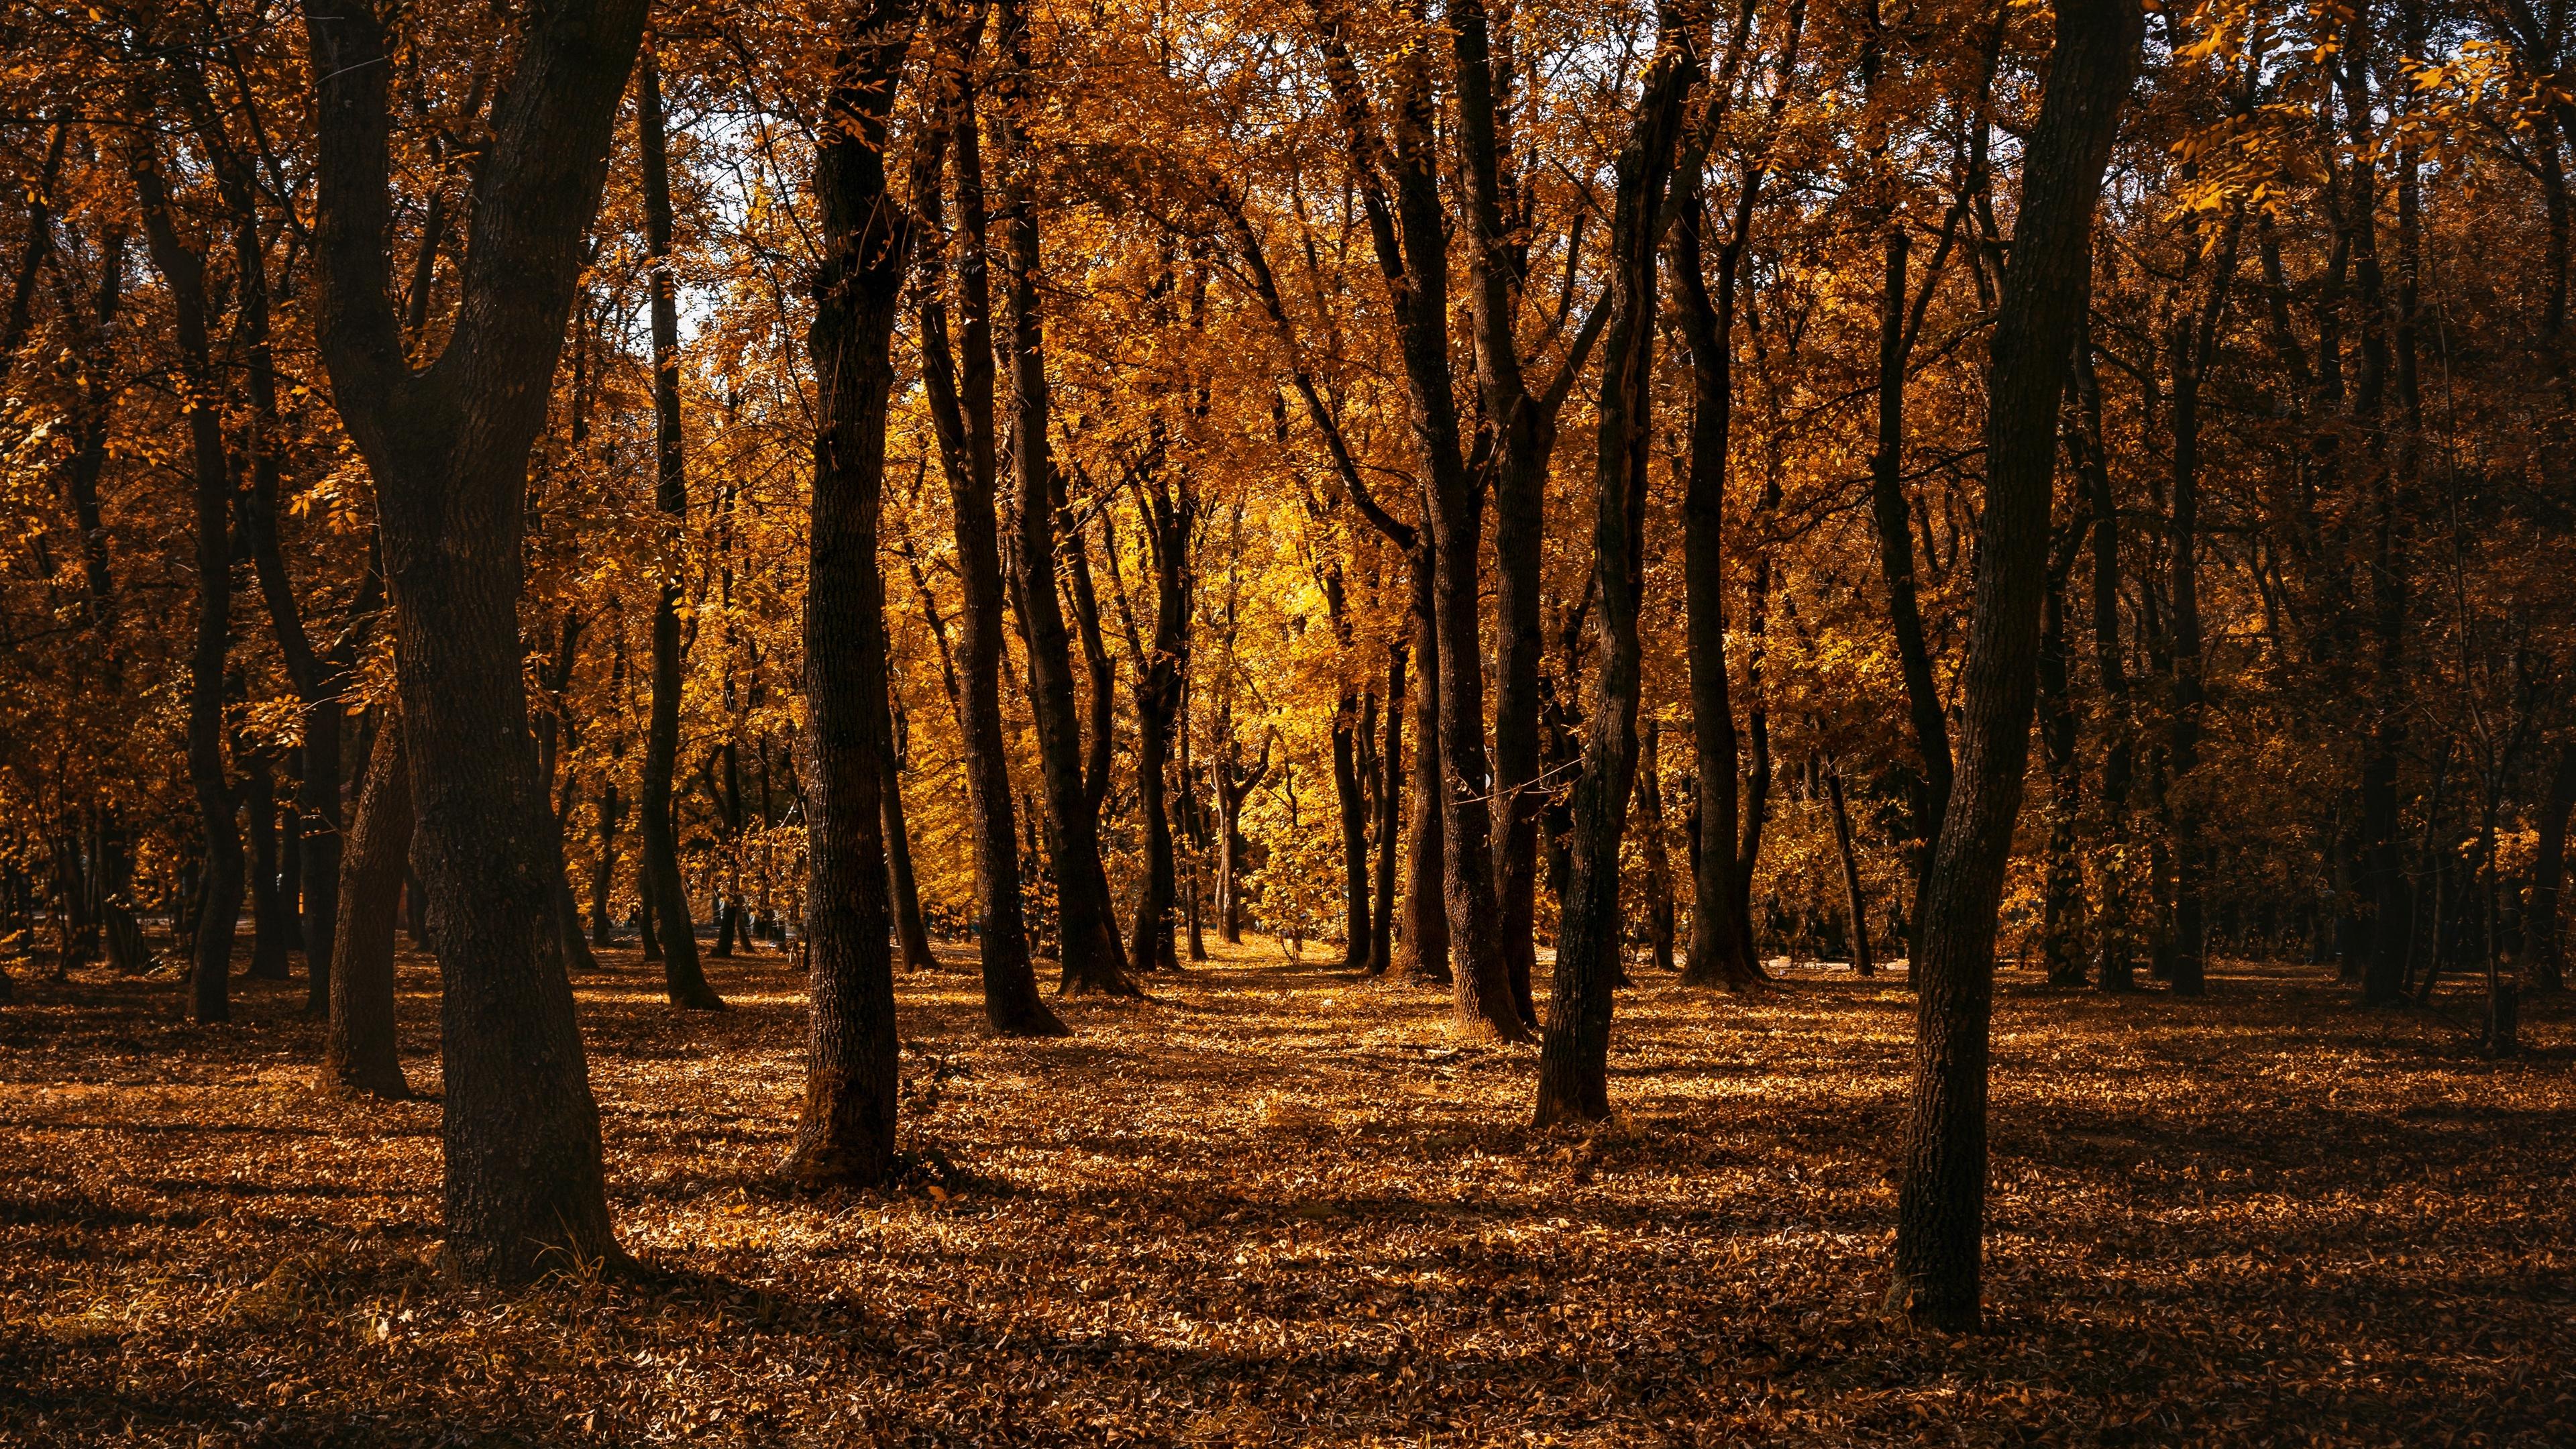 Download wallpaper 3840x2160 autumn, forest, trees, park